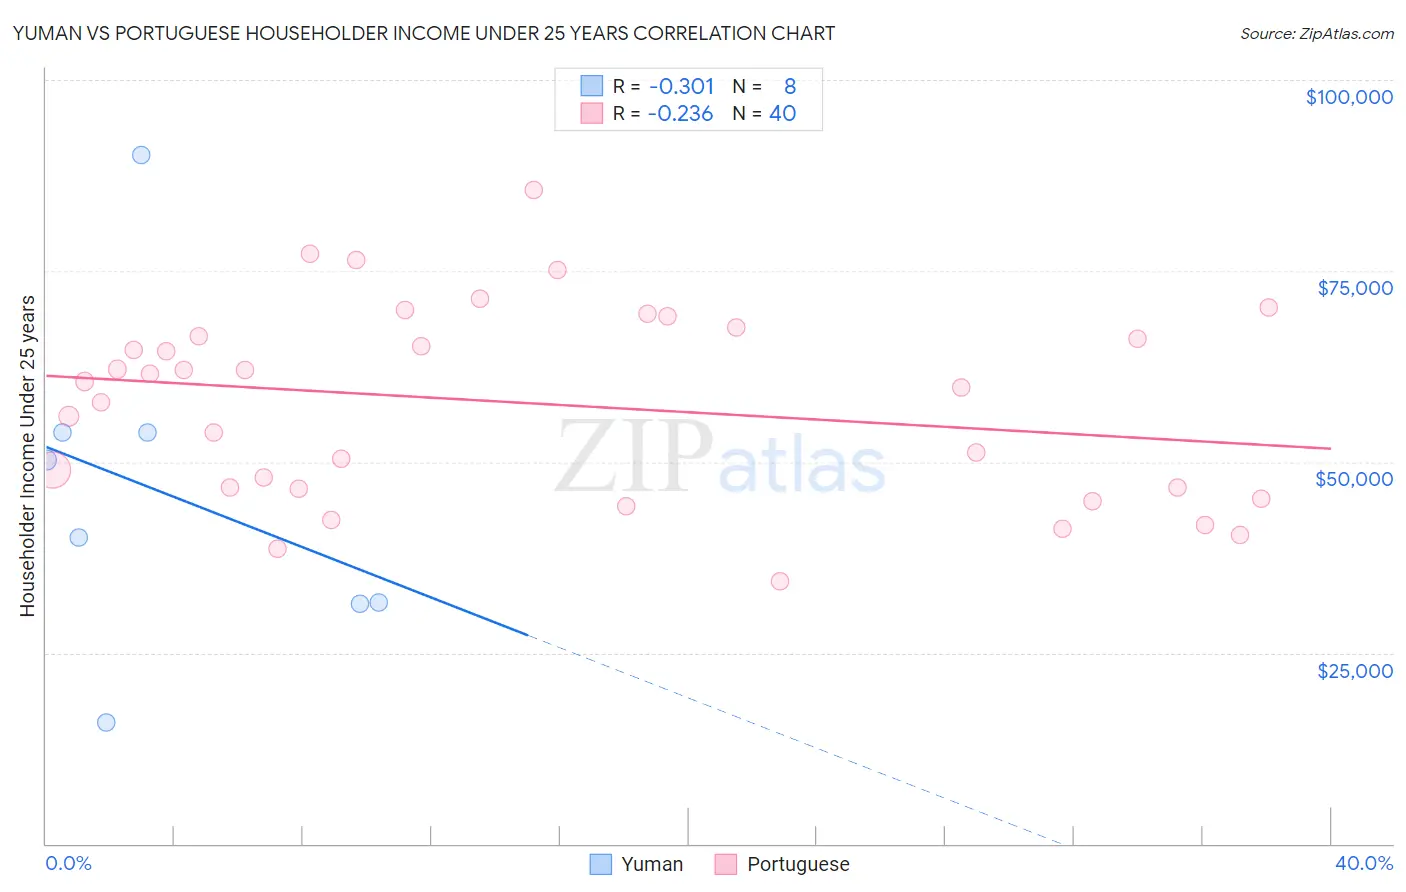 Yuman vs Portuguese Householder Income Under 25 years